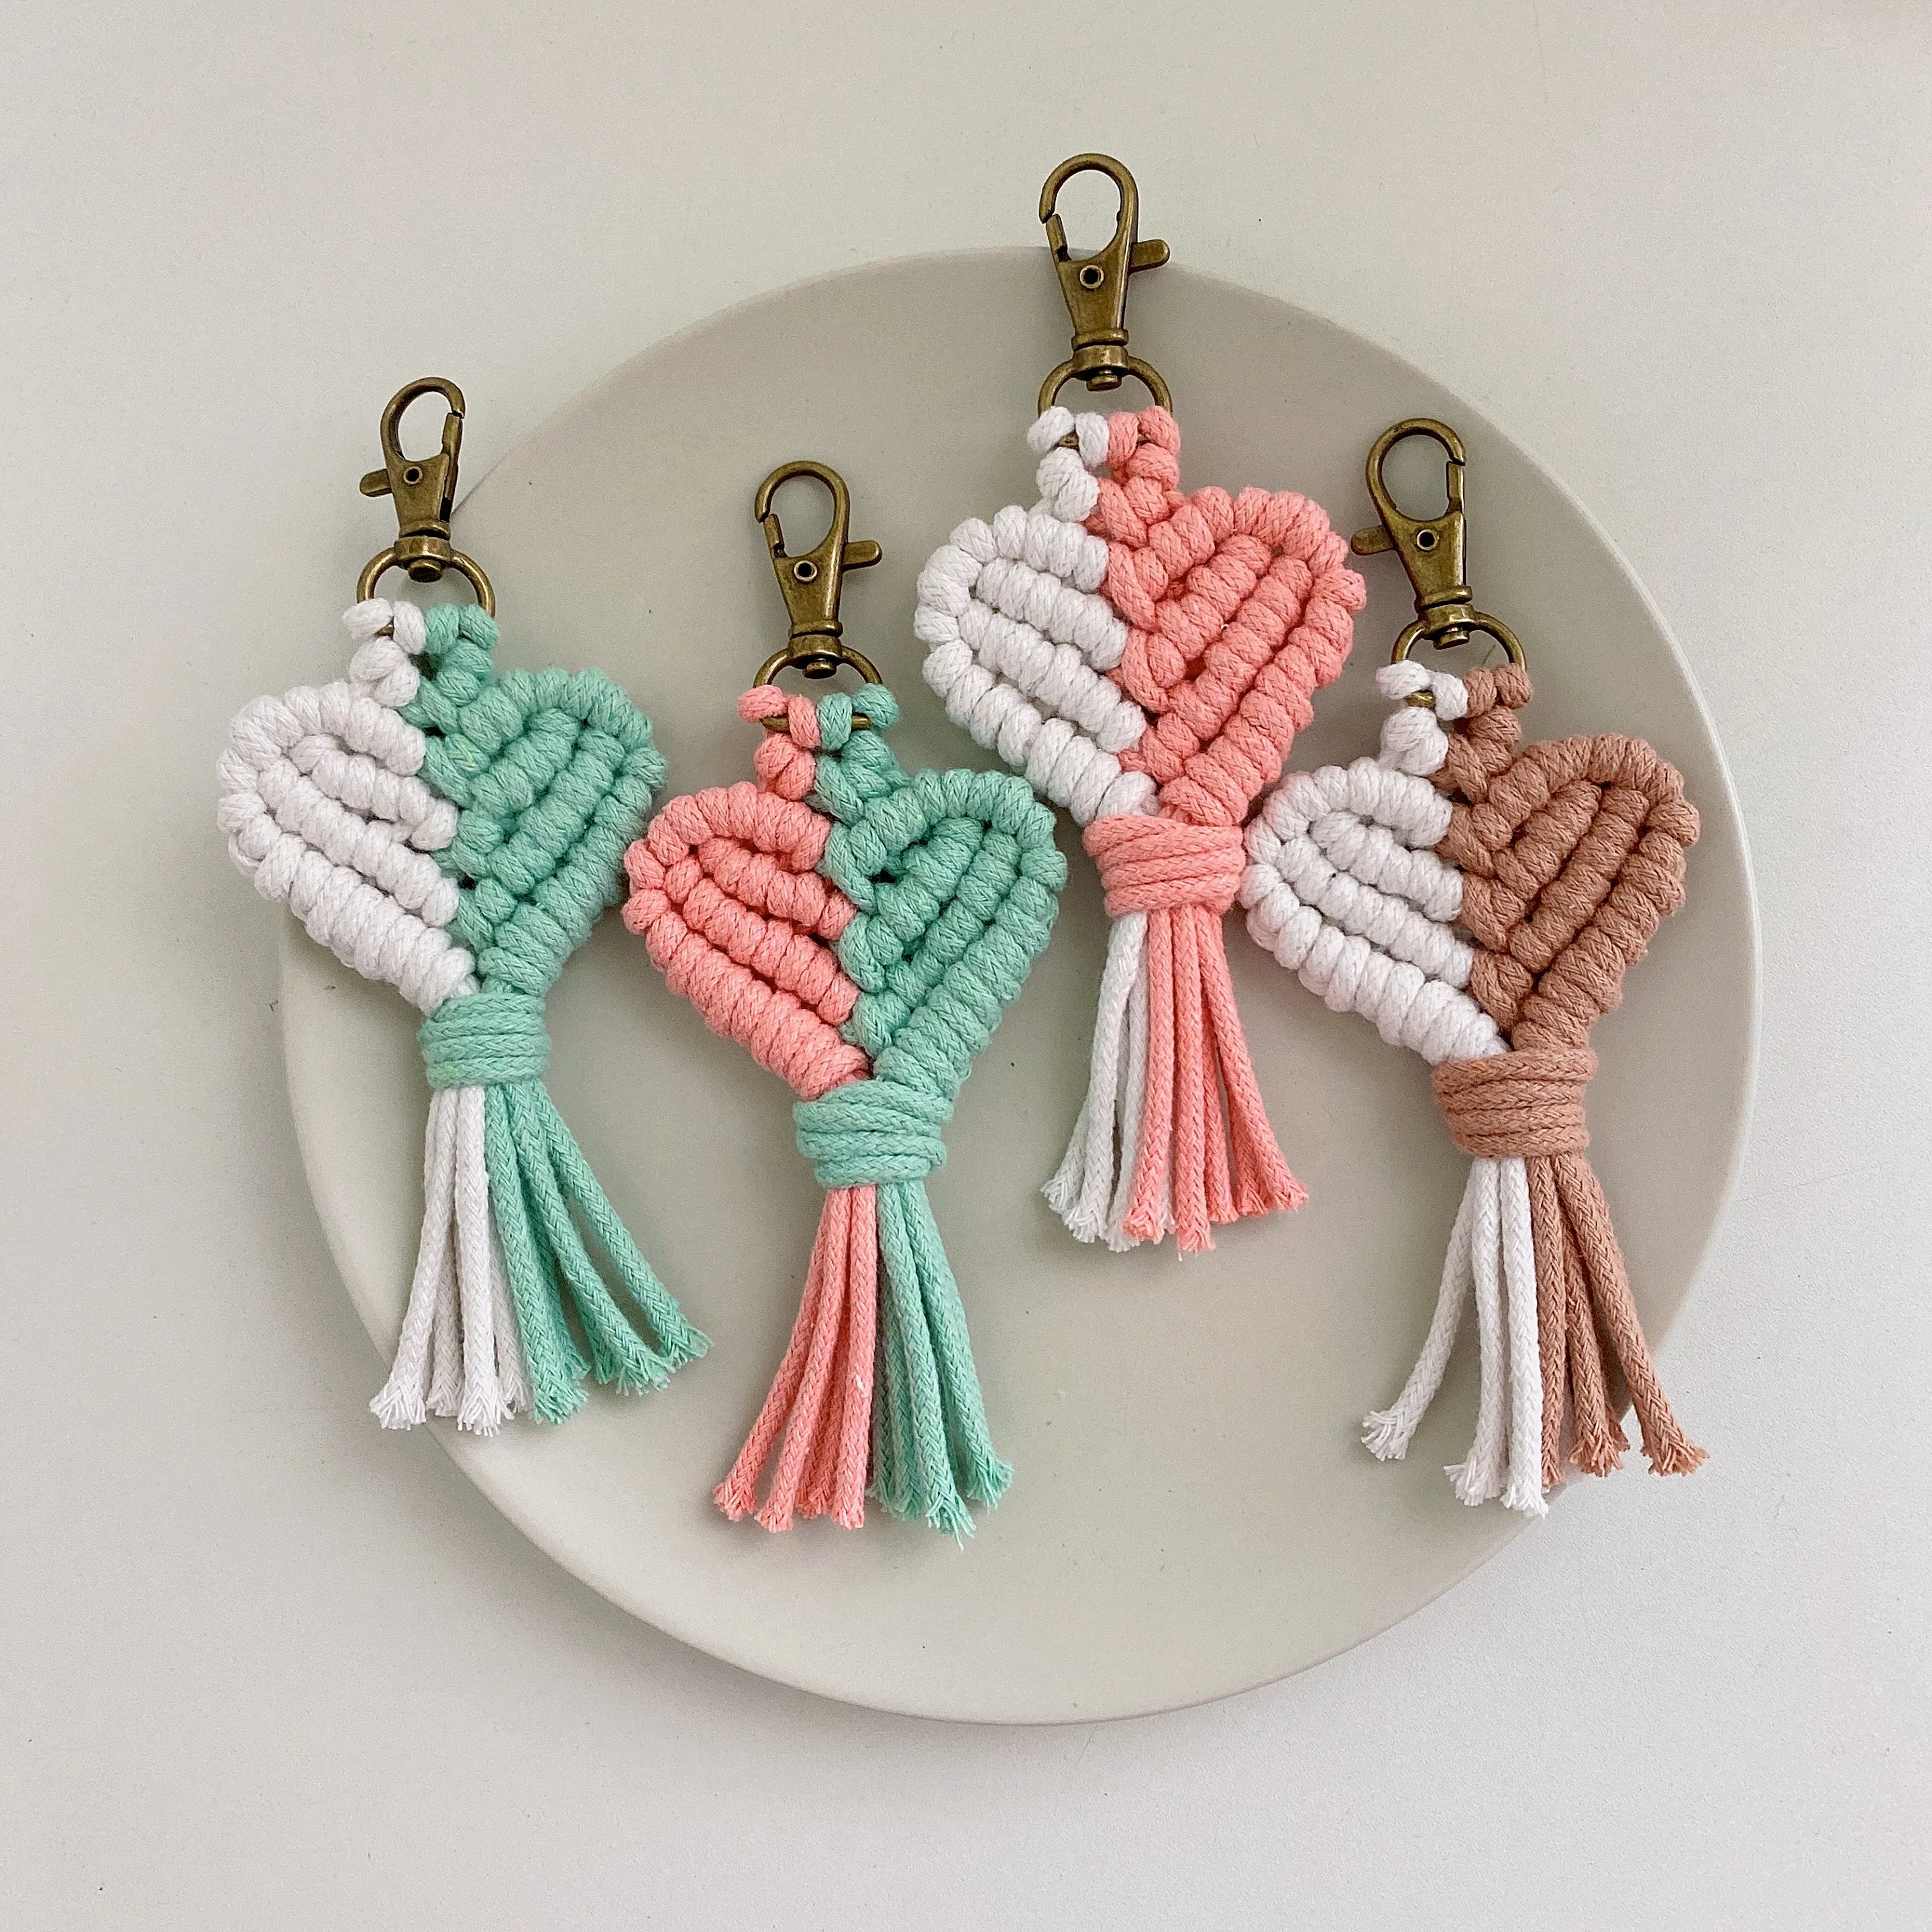 Macrame Hobo Keychain Handmade Heart-shaped Bag Pendant Gift Car Keys Mother's Day gift Fashion Jewelry Accessories Wholesale toddler wig afro hair dreadlocks hat hobo mad scientist rasta caveman handmade winter knit warm cap gift funny party beanies kid